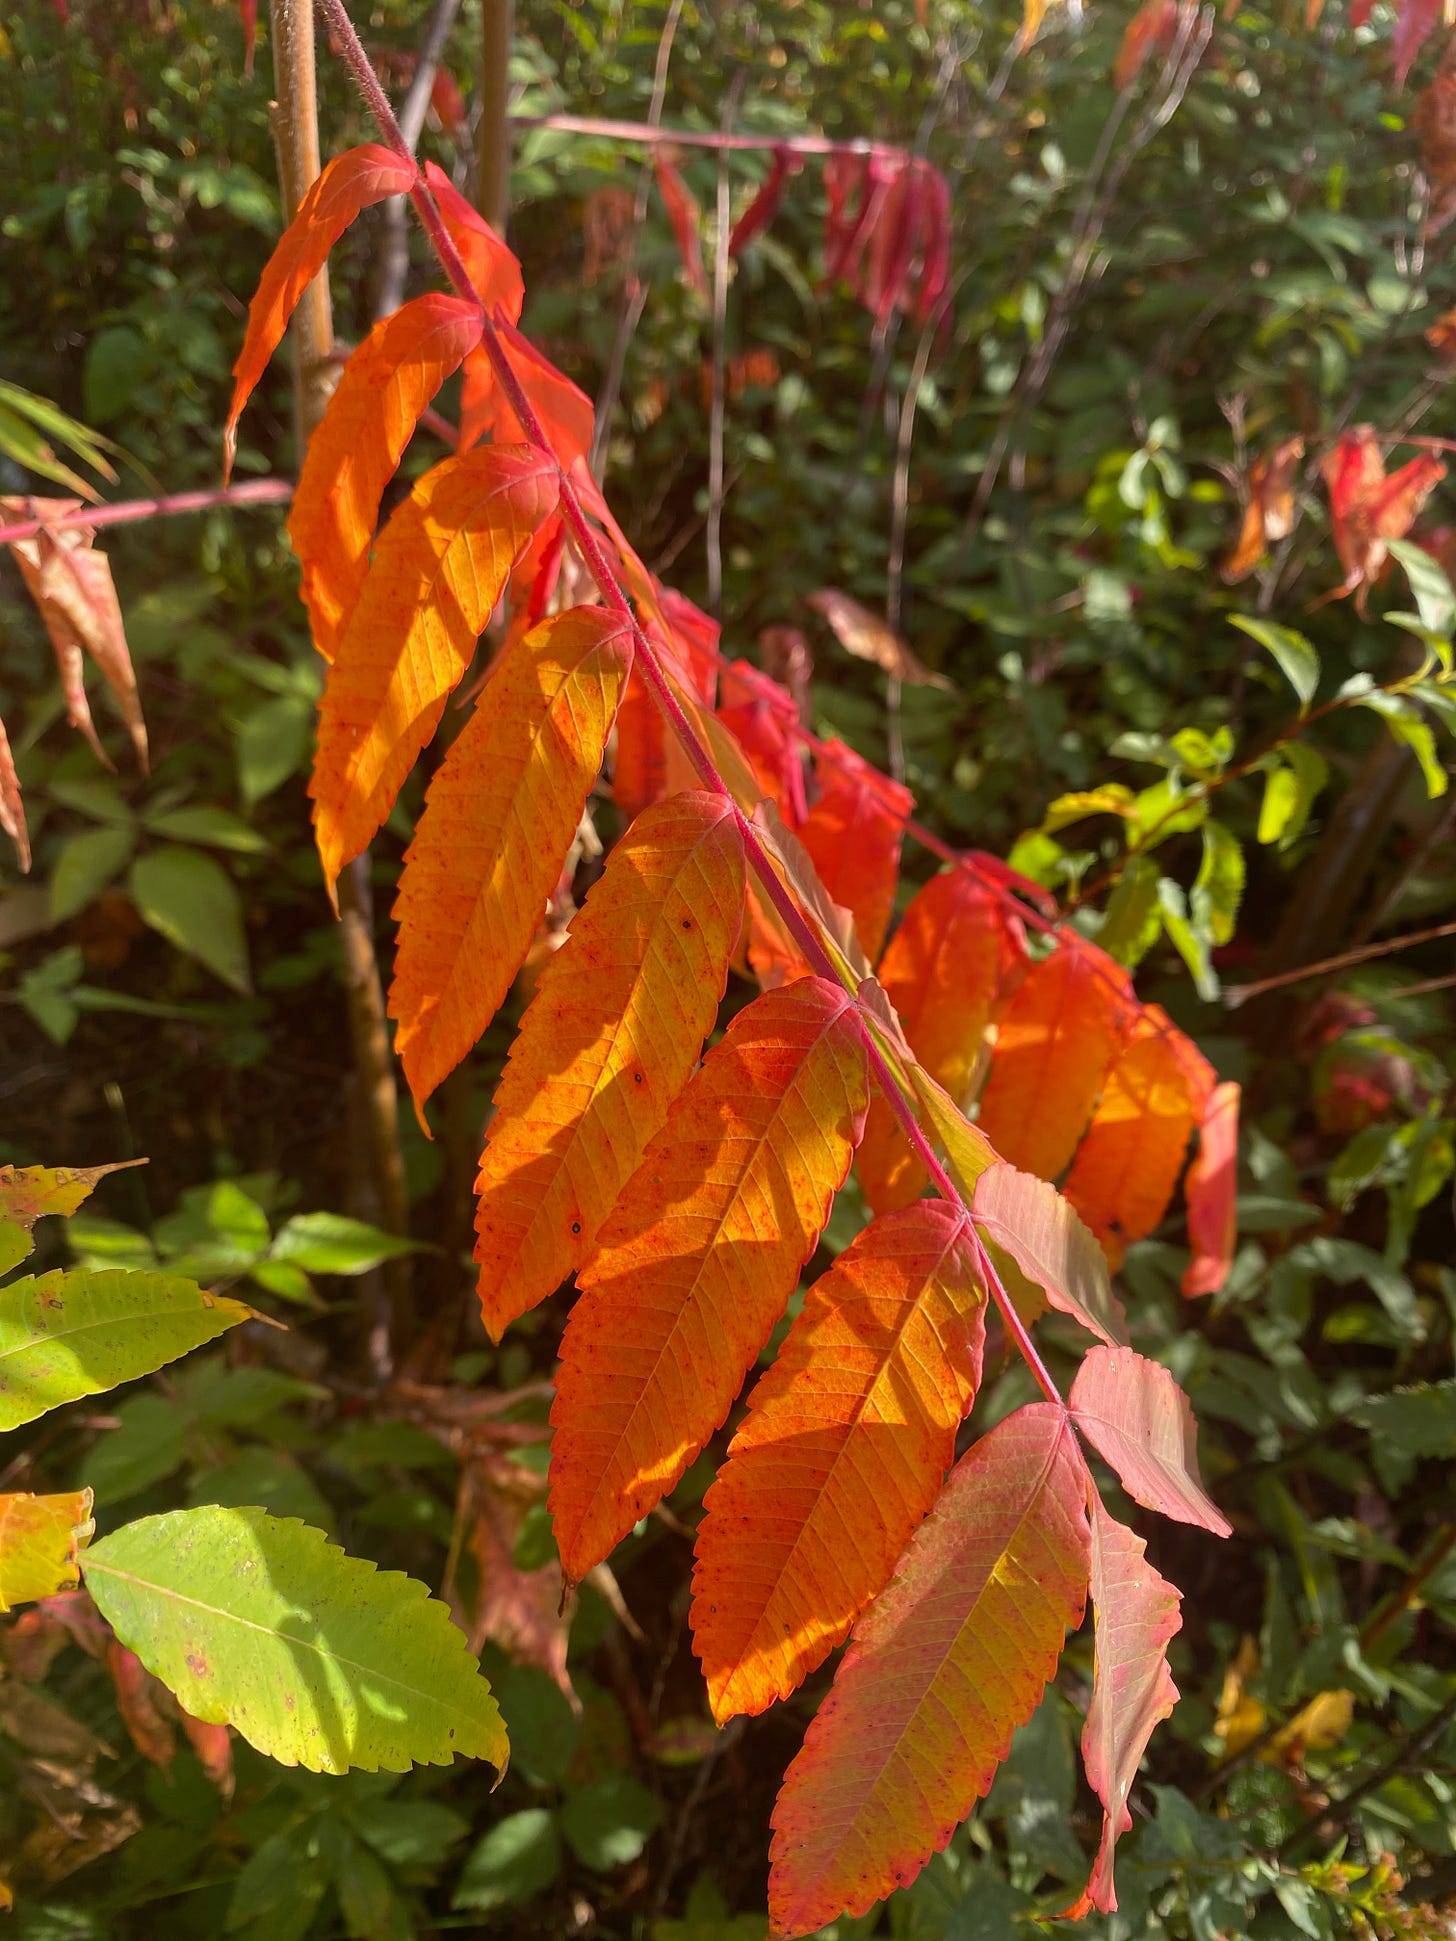 Closeup of a sumac branch, with many small red, orange and gold tear-shaped leaves lit up by the sun.